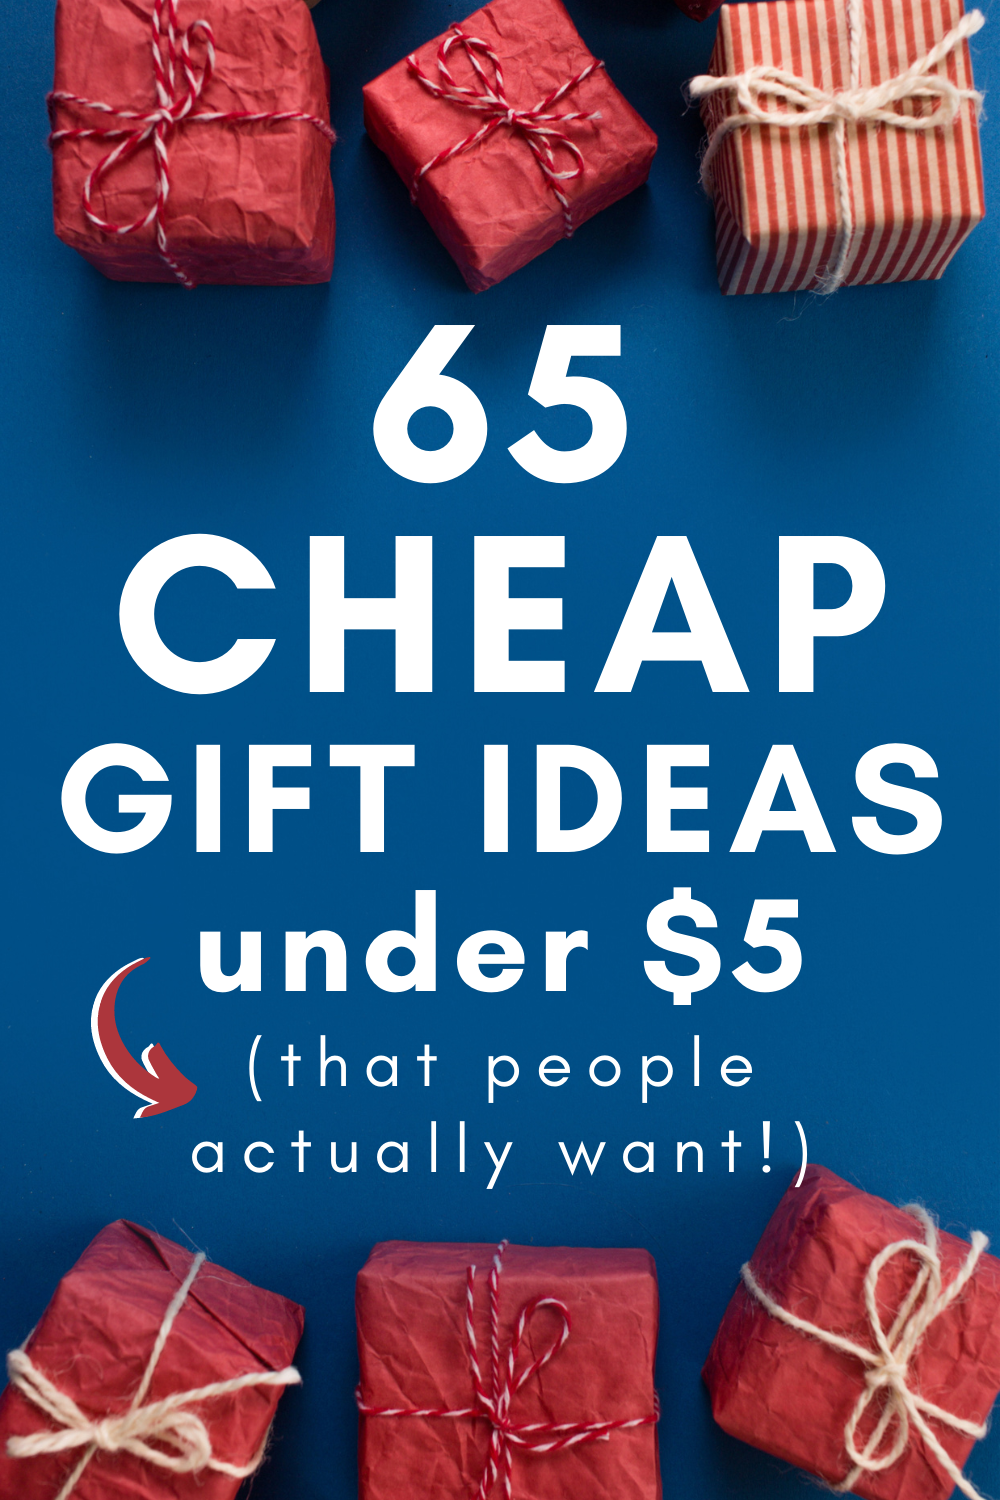 65 Fun & Unique Gifts Under $5 (small useful gifts that people actually  want!)